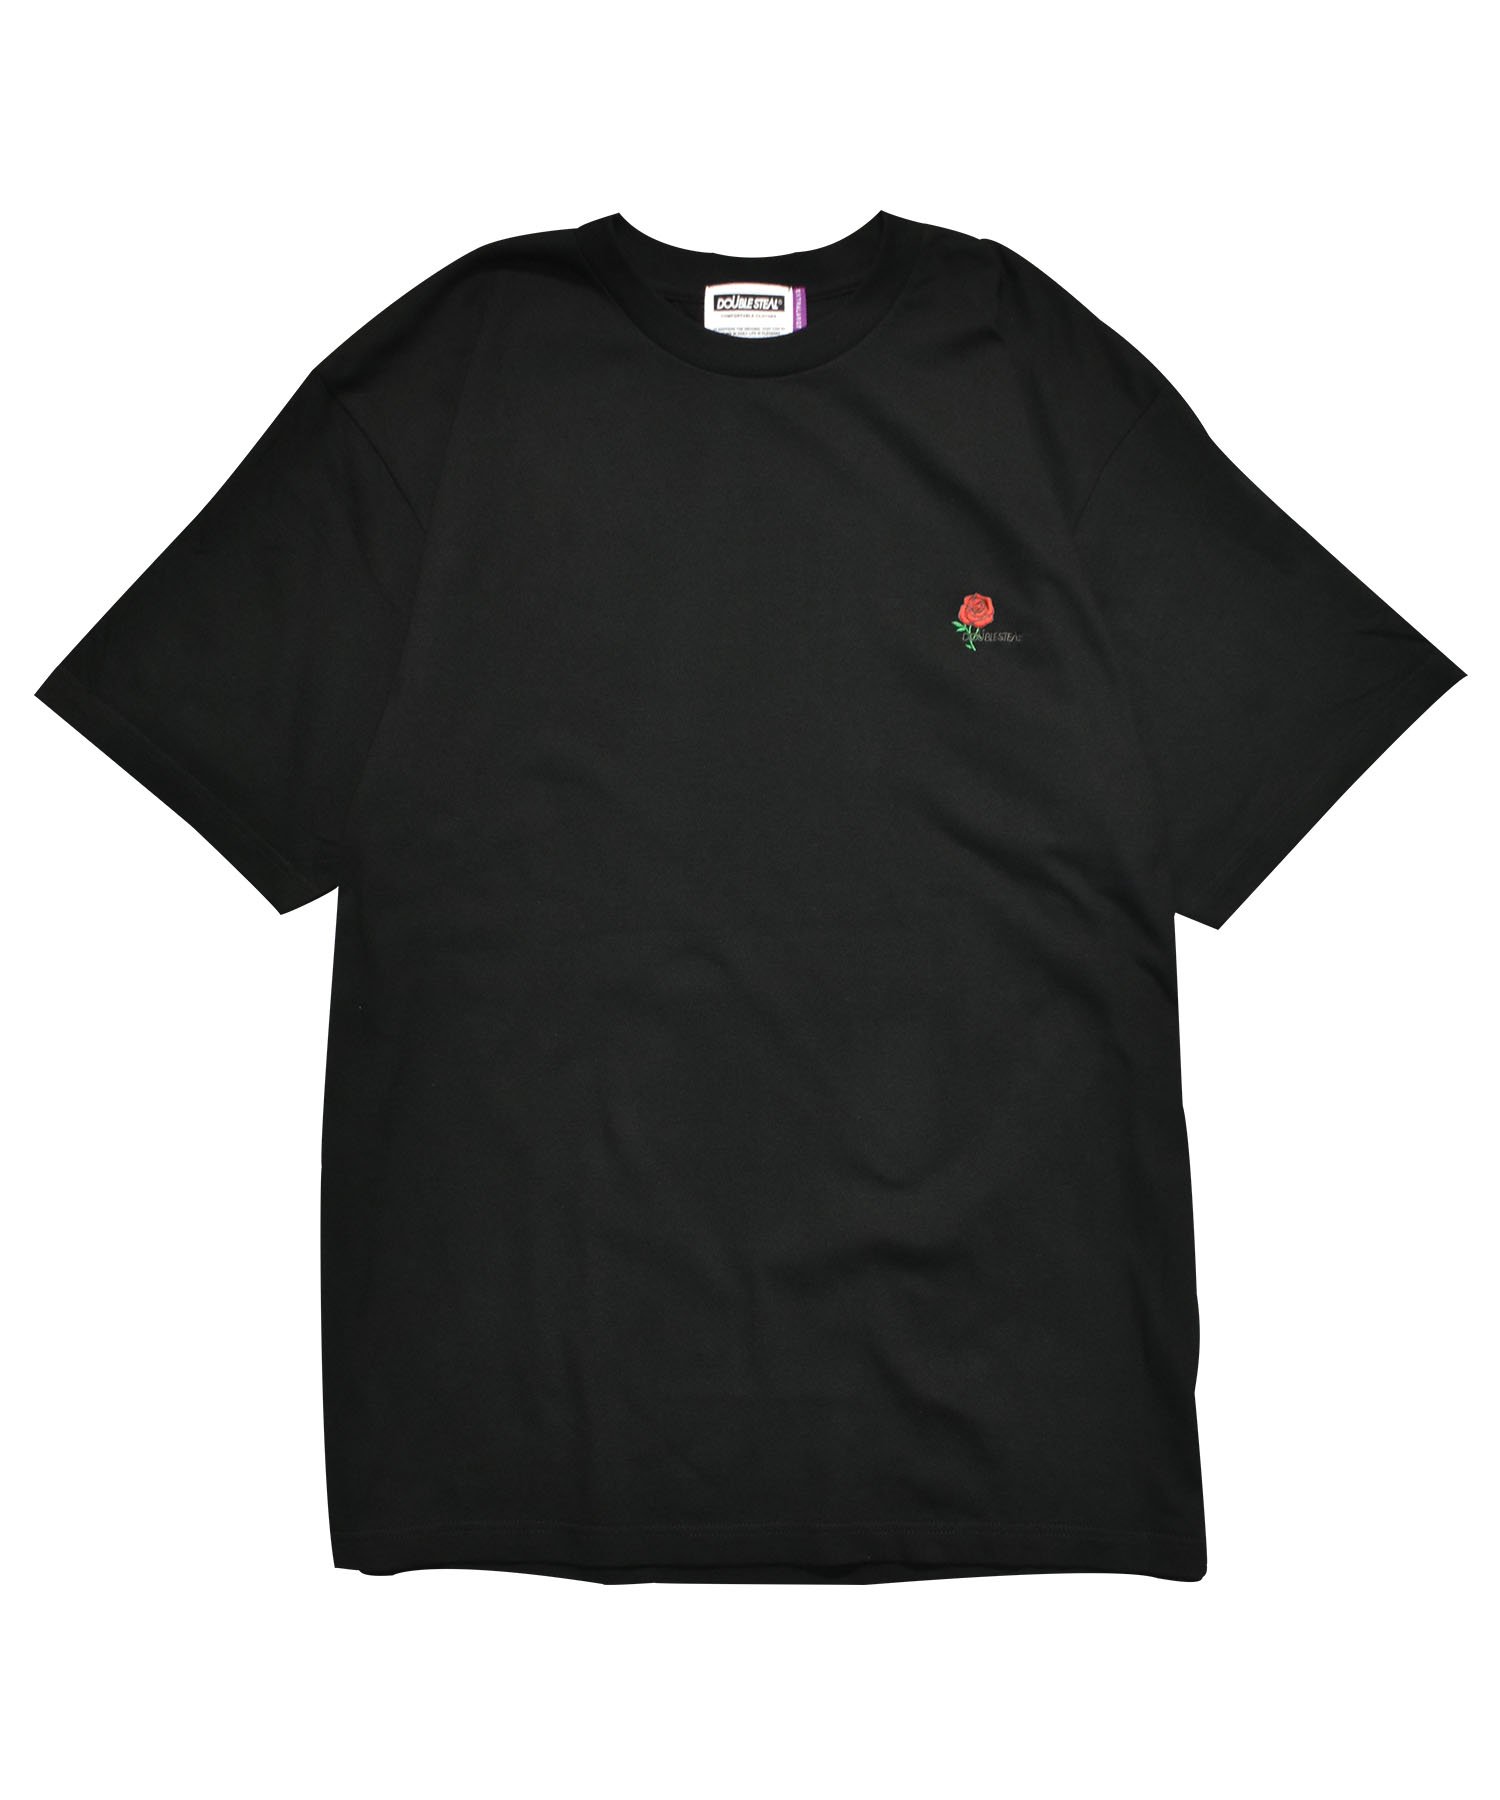 ROSE Embroidery Tシャツ